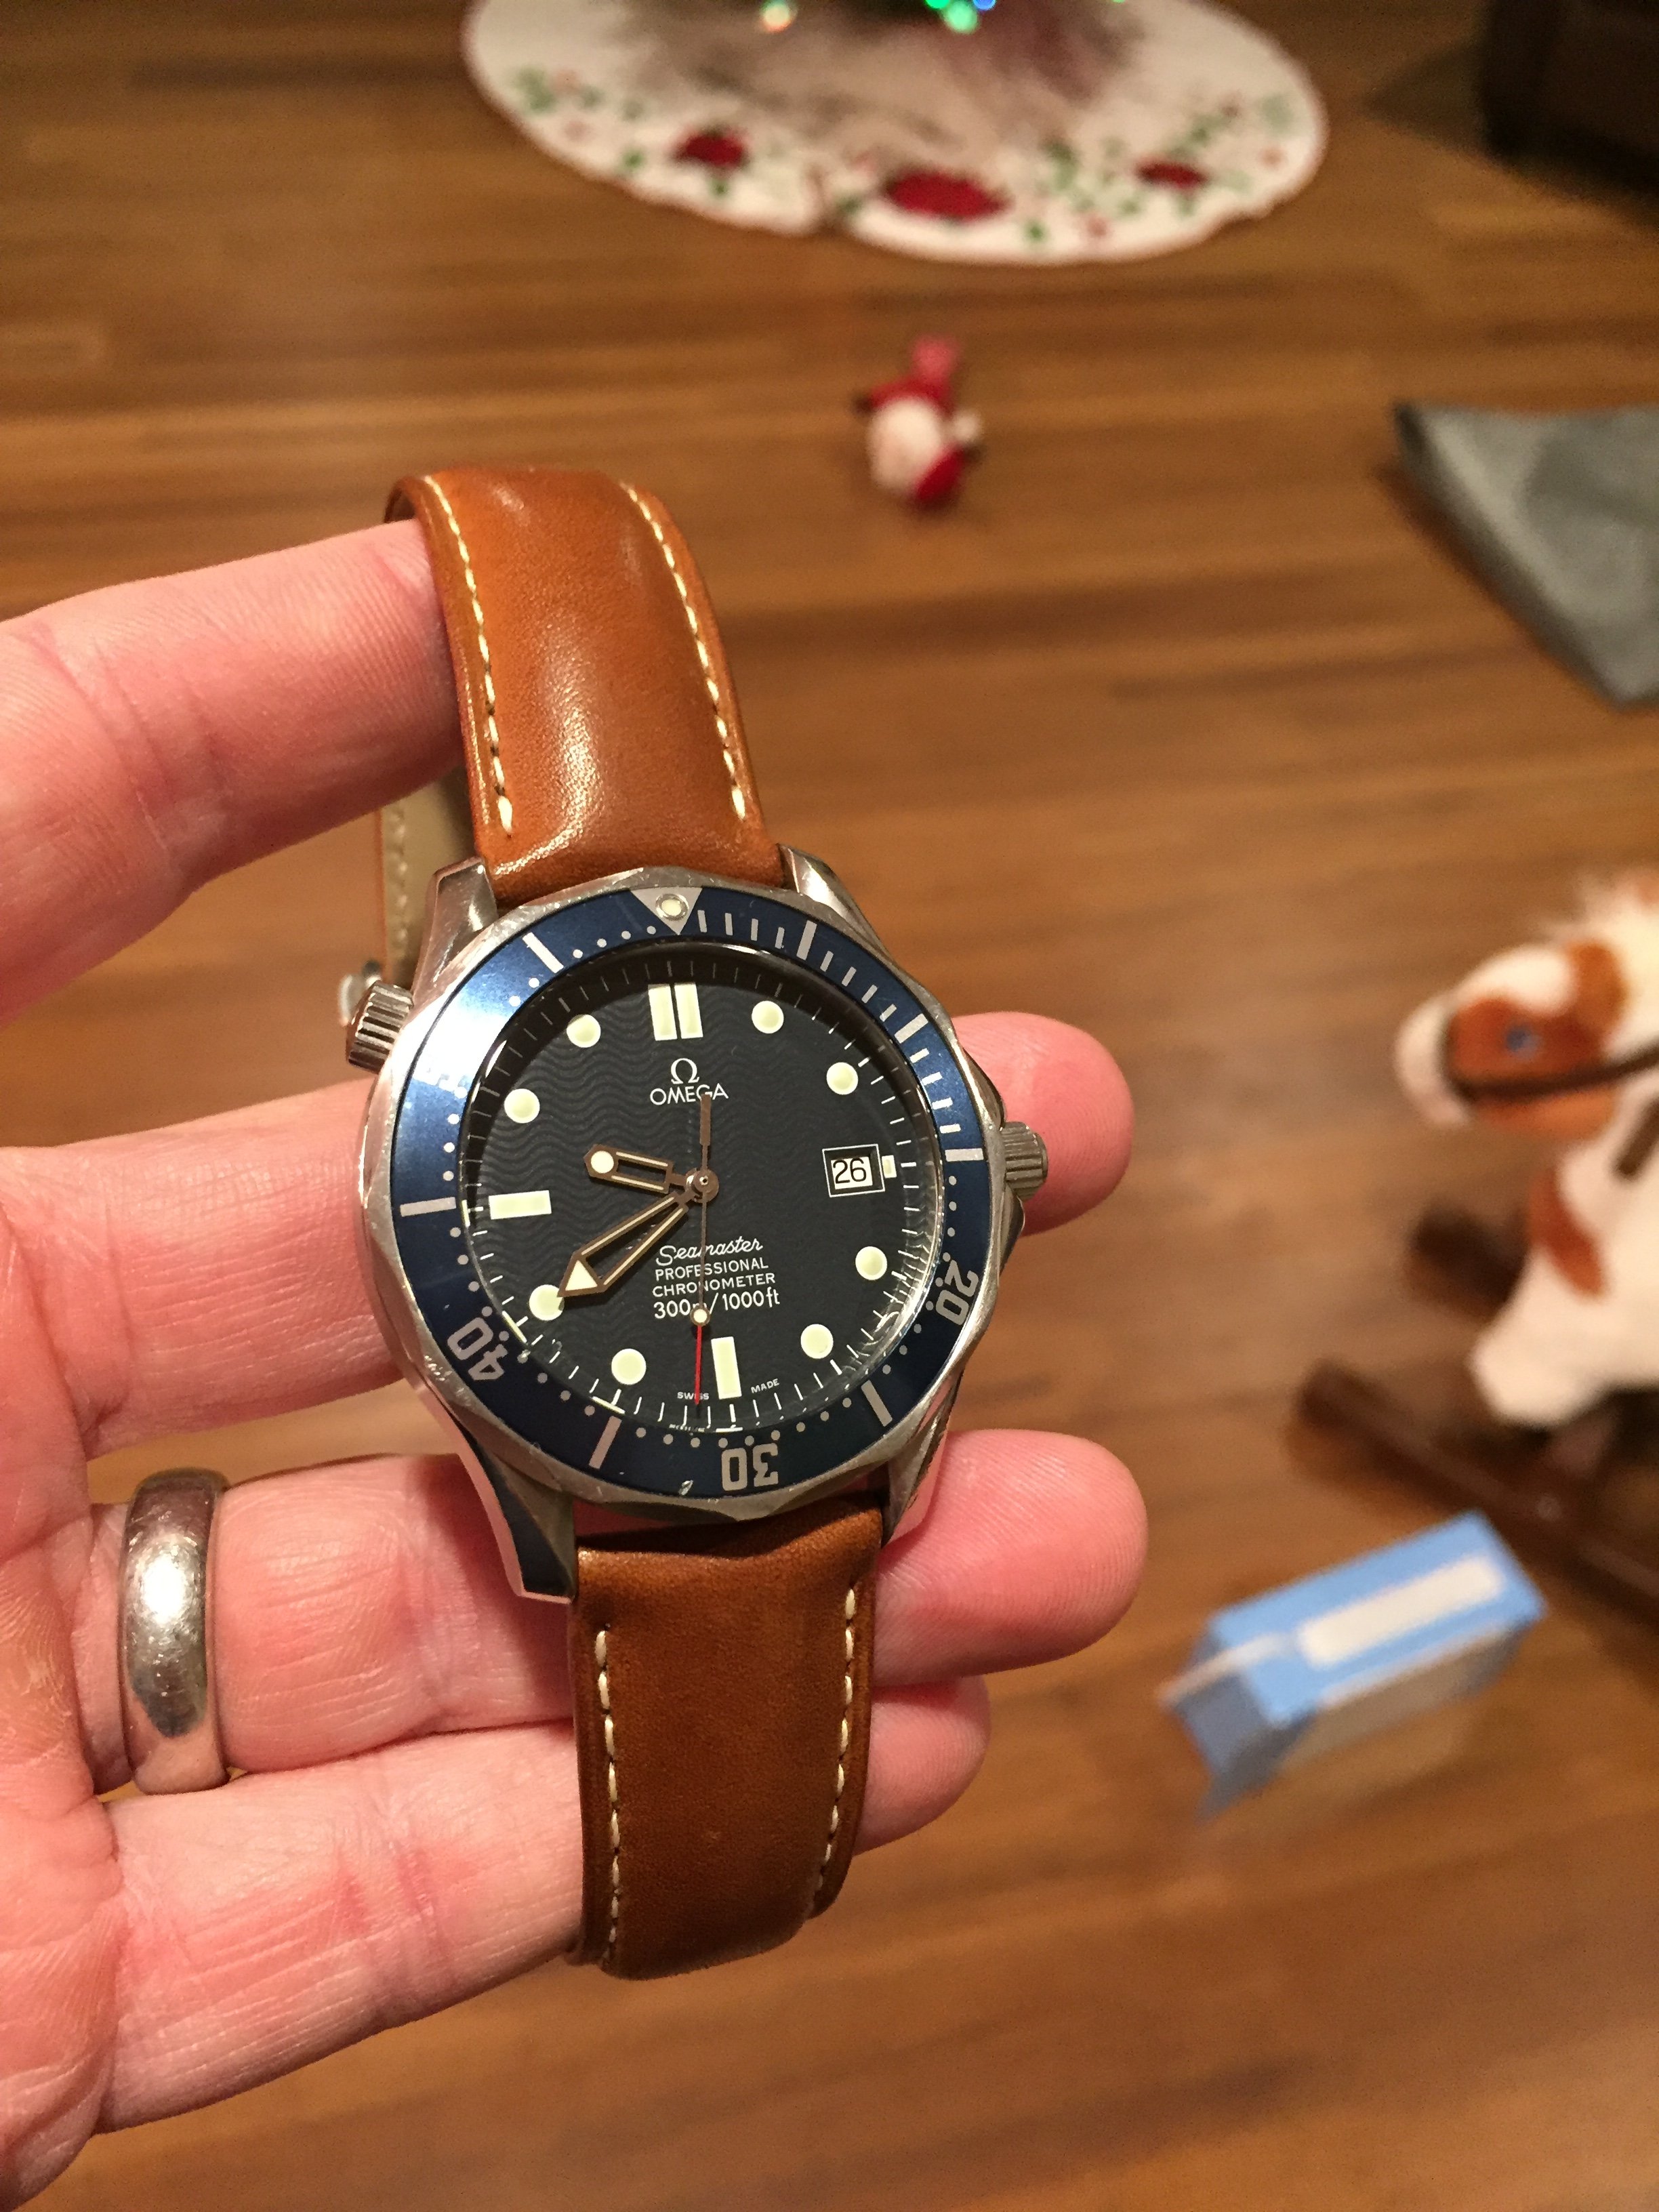 Pics request - straps on a 41mm omega 